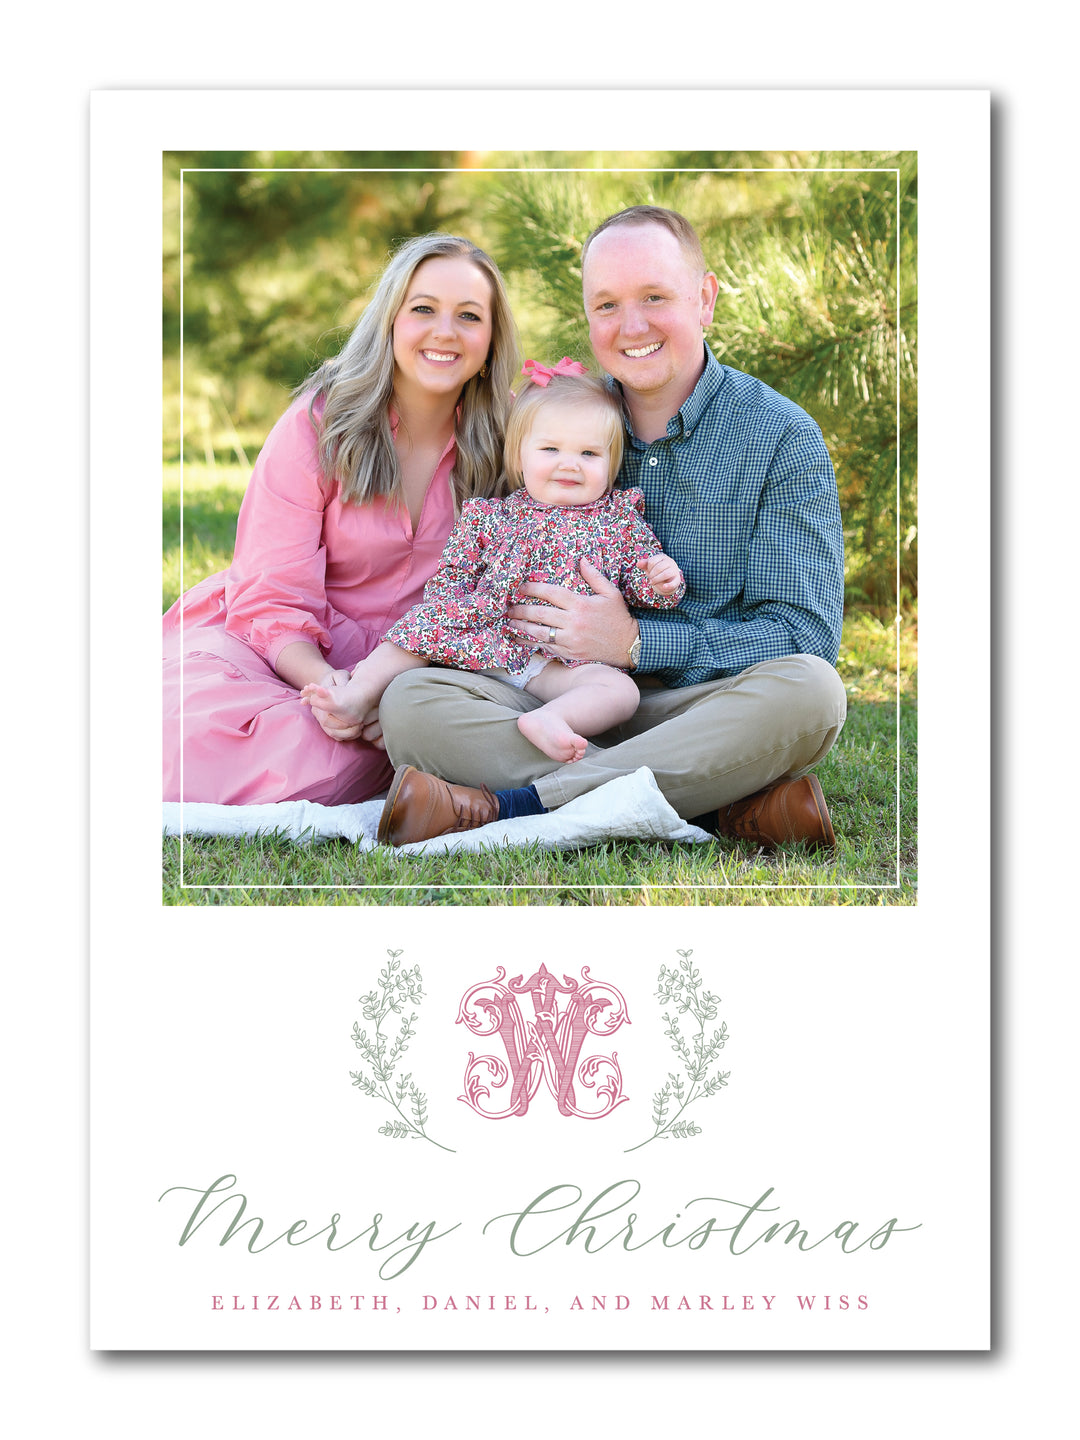 The Wiss Christmas Card